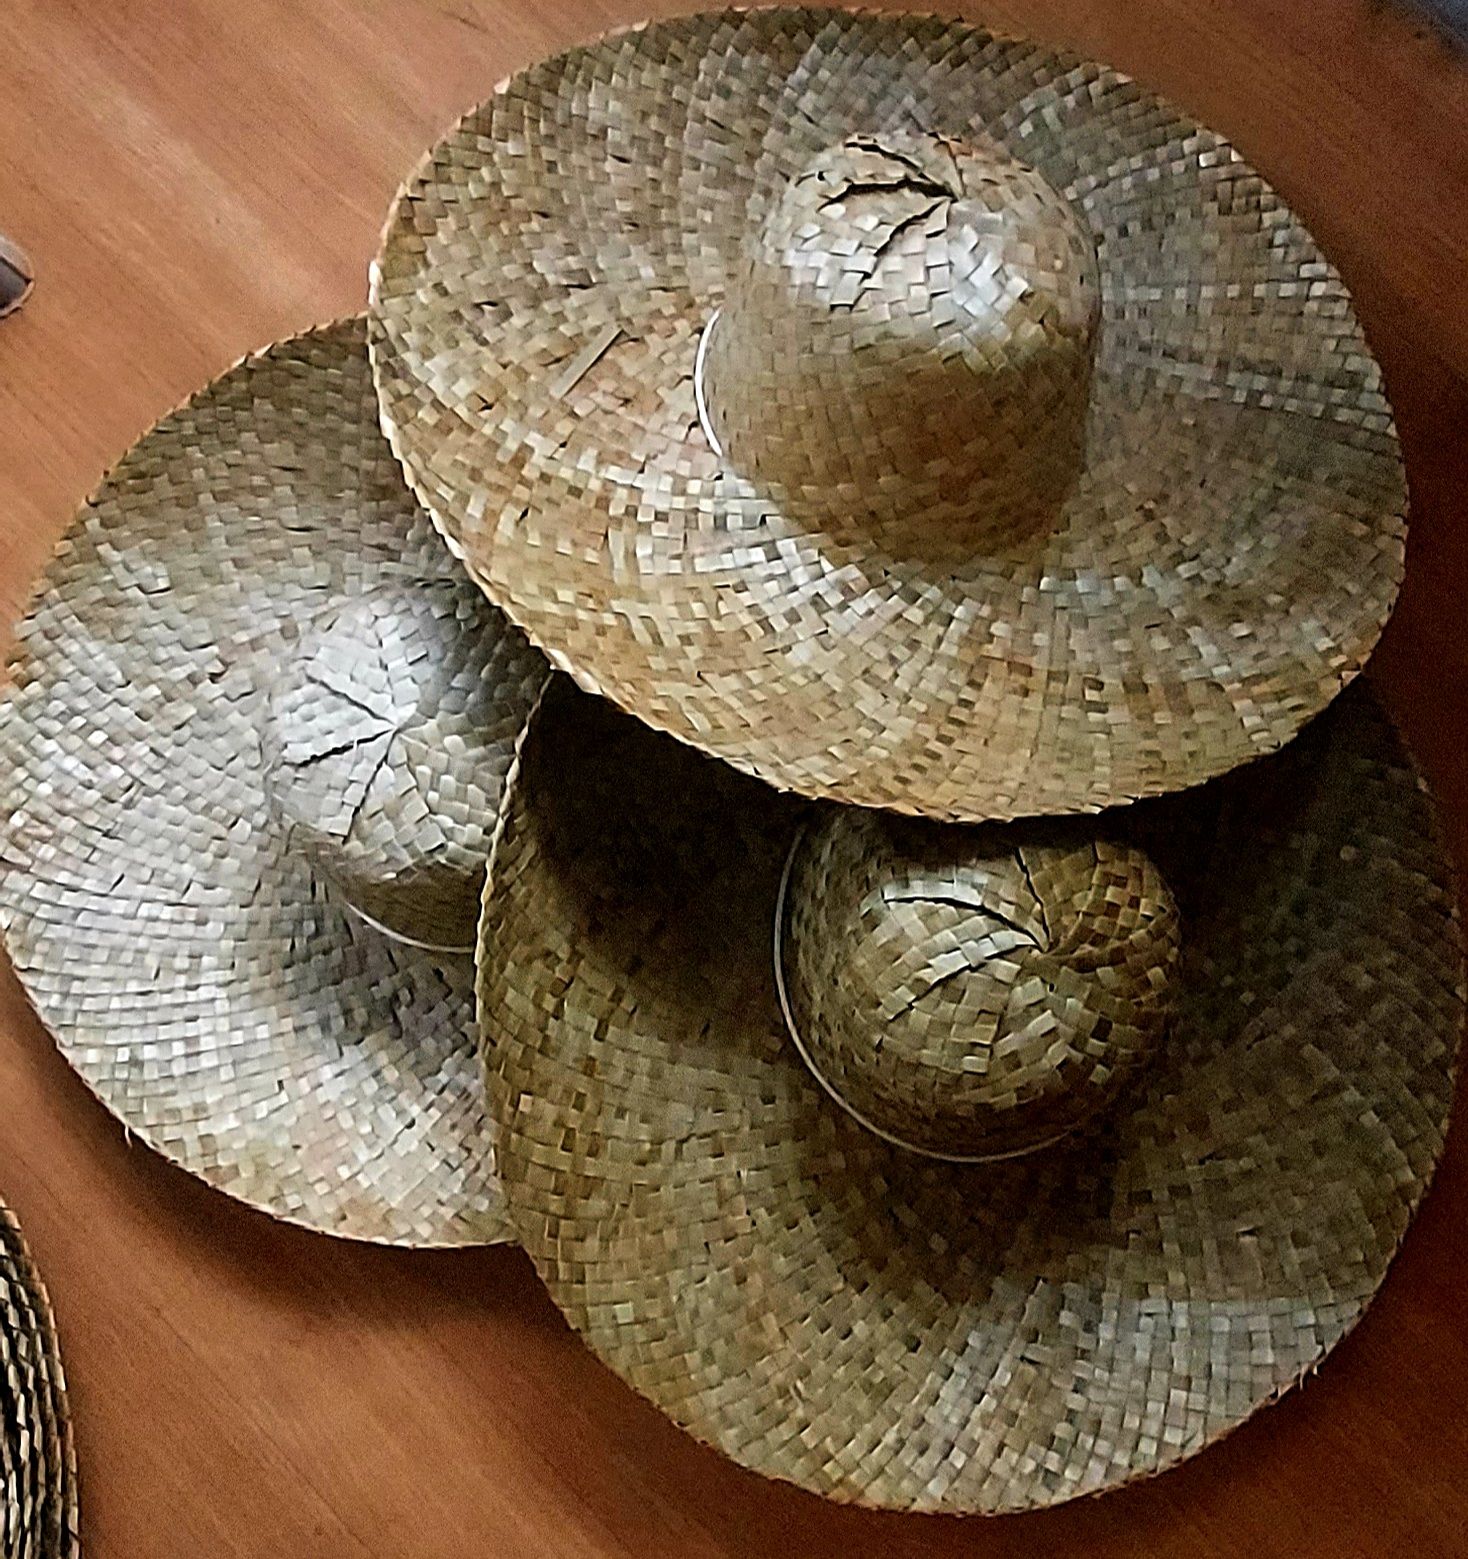 Sombrero / Balanggot - Native Filipino Farmers' Hat Usually handcrafted out  of nipa & palm leaves, these hats are used by our Filipino